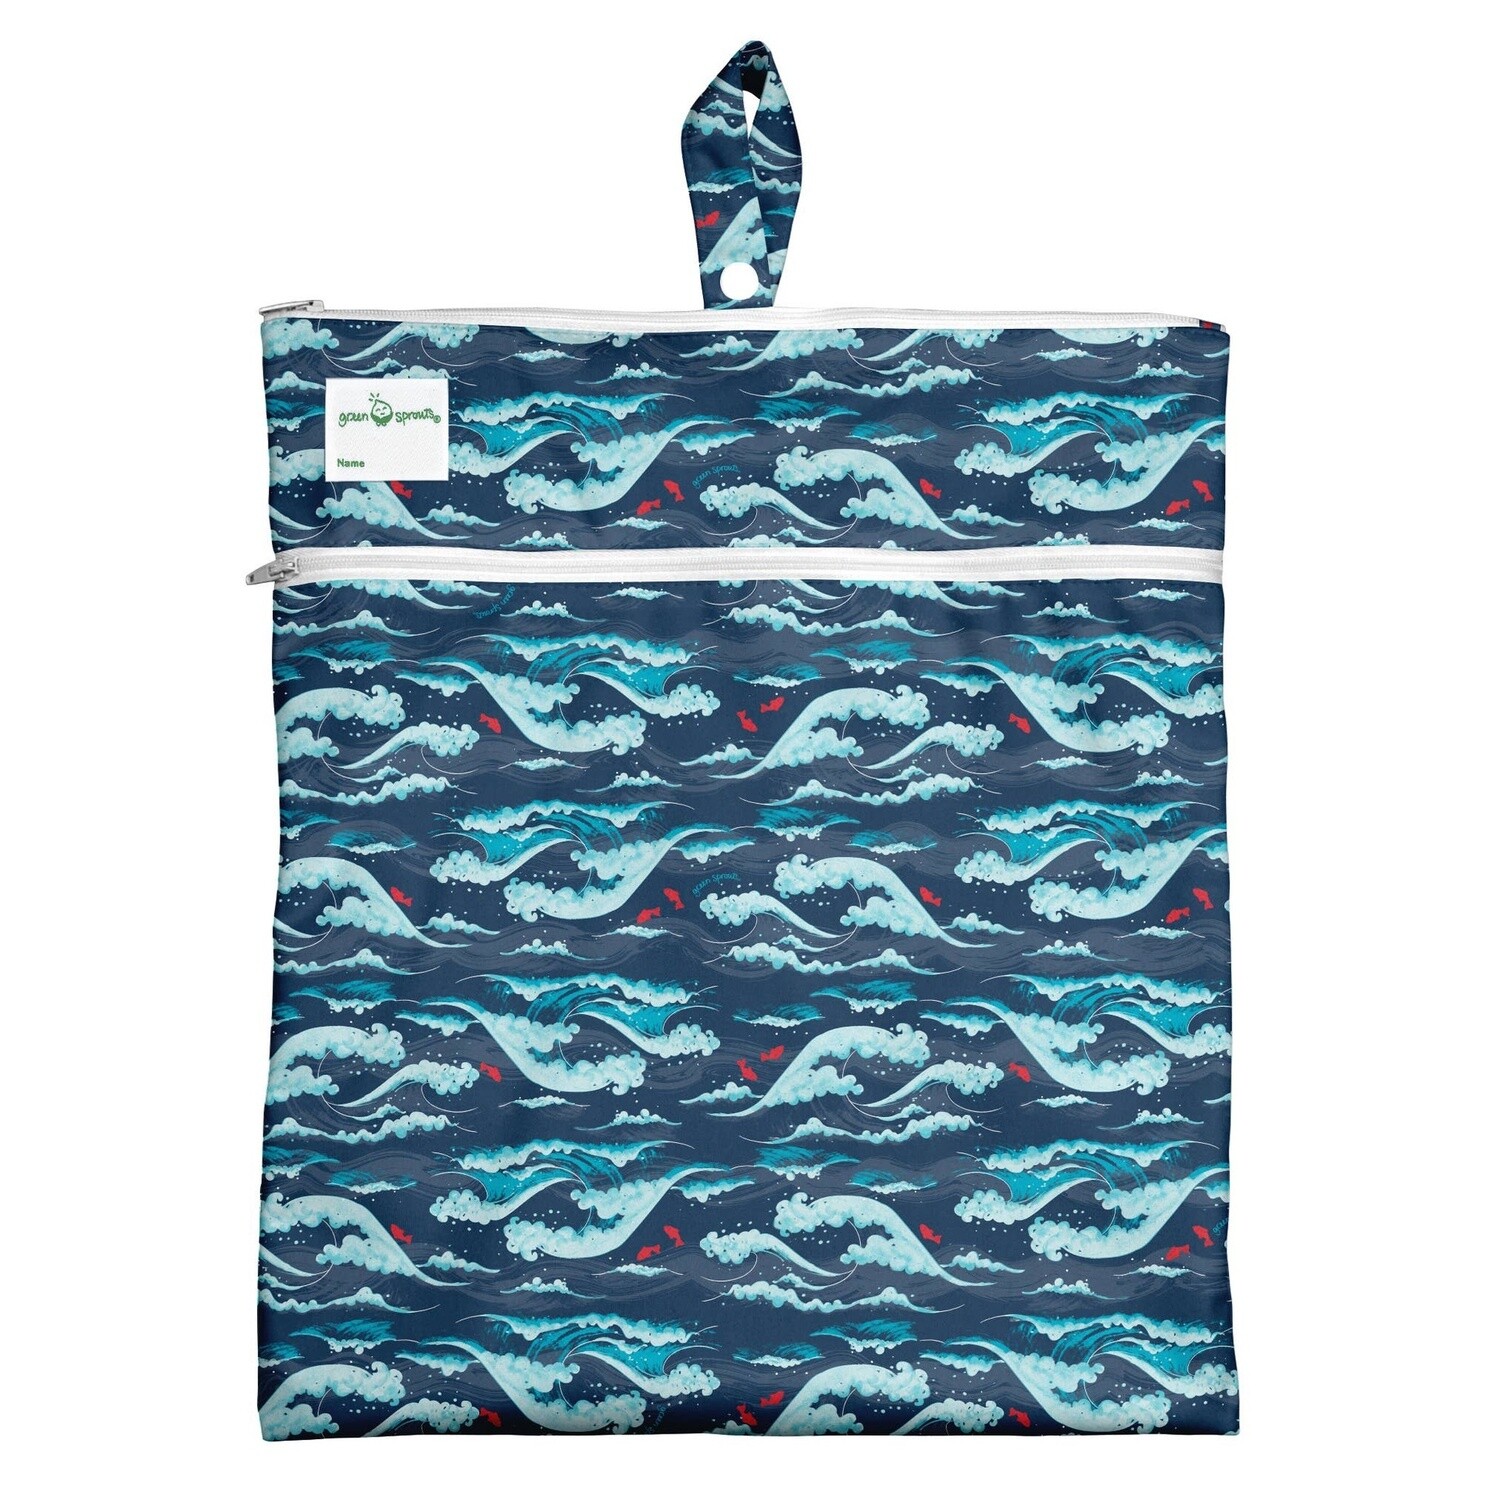 Green Sprouts Wet &amp; Dry Bag: Navy Tidal Wave